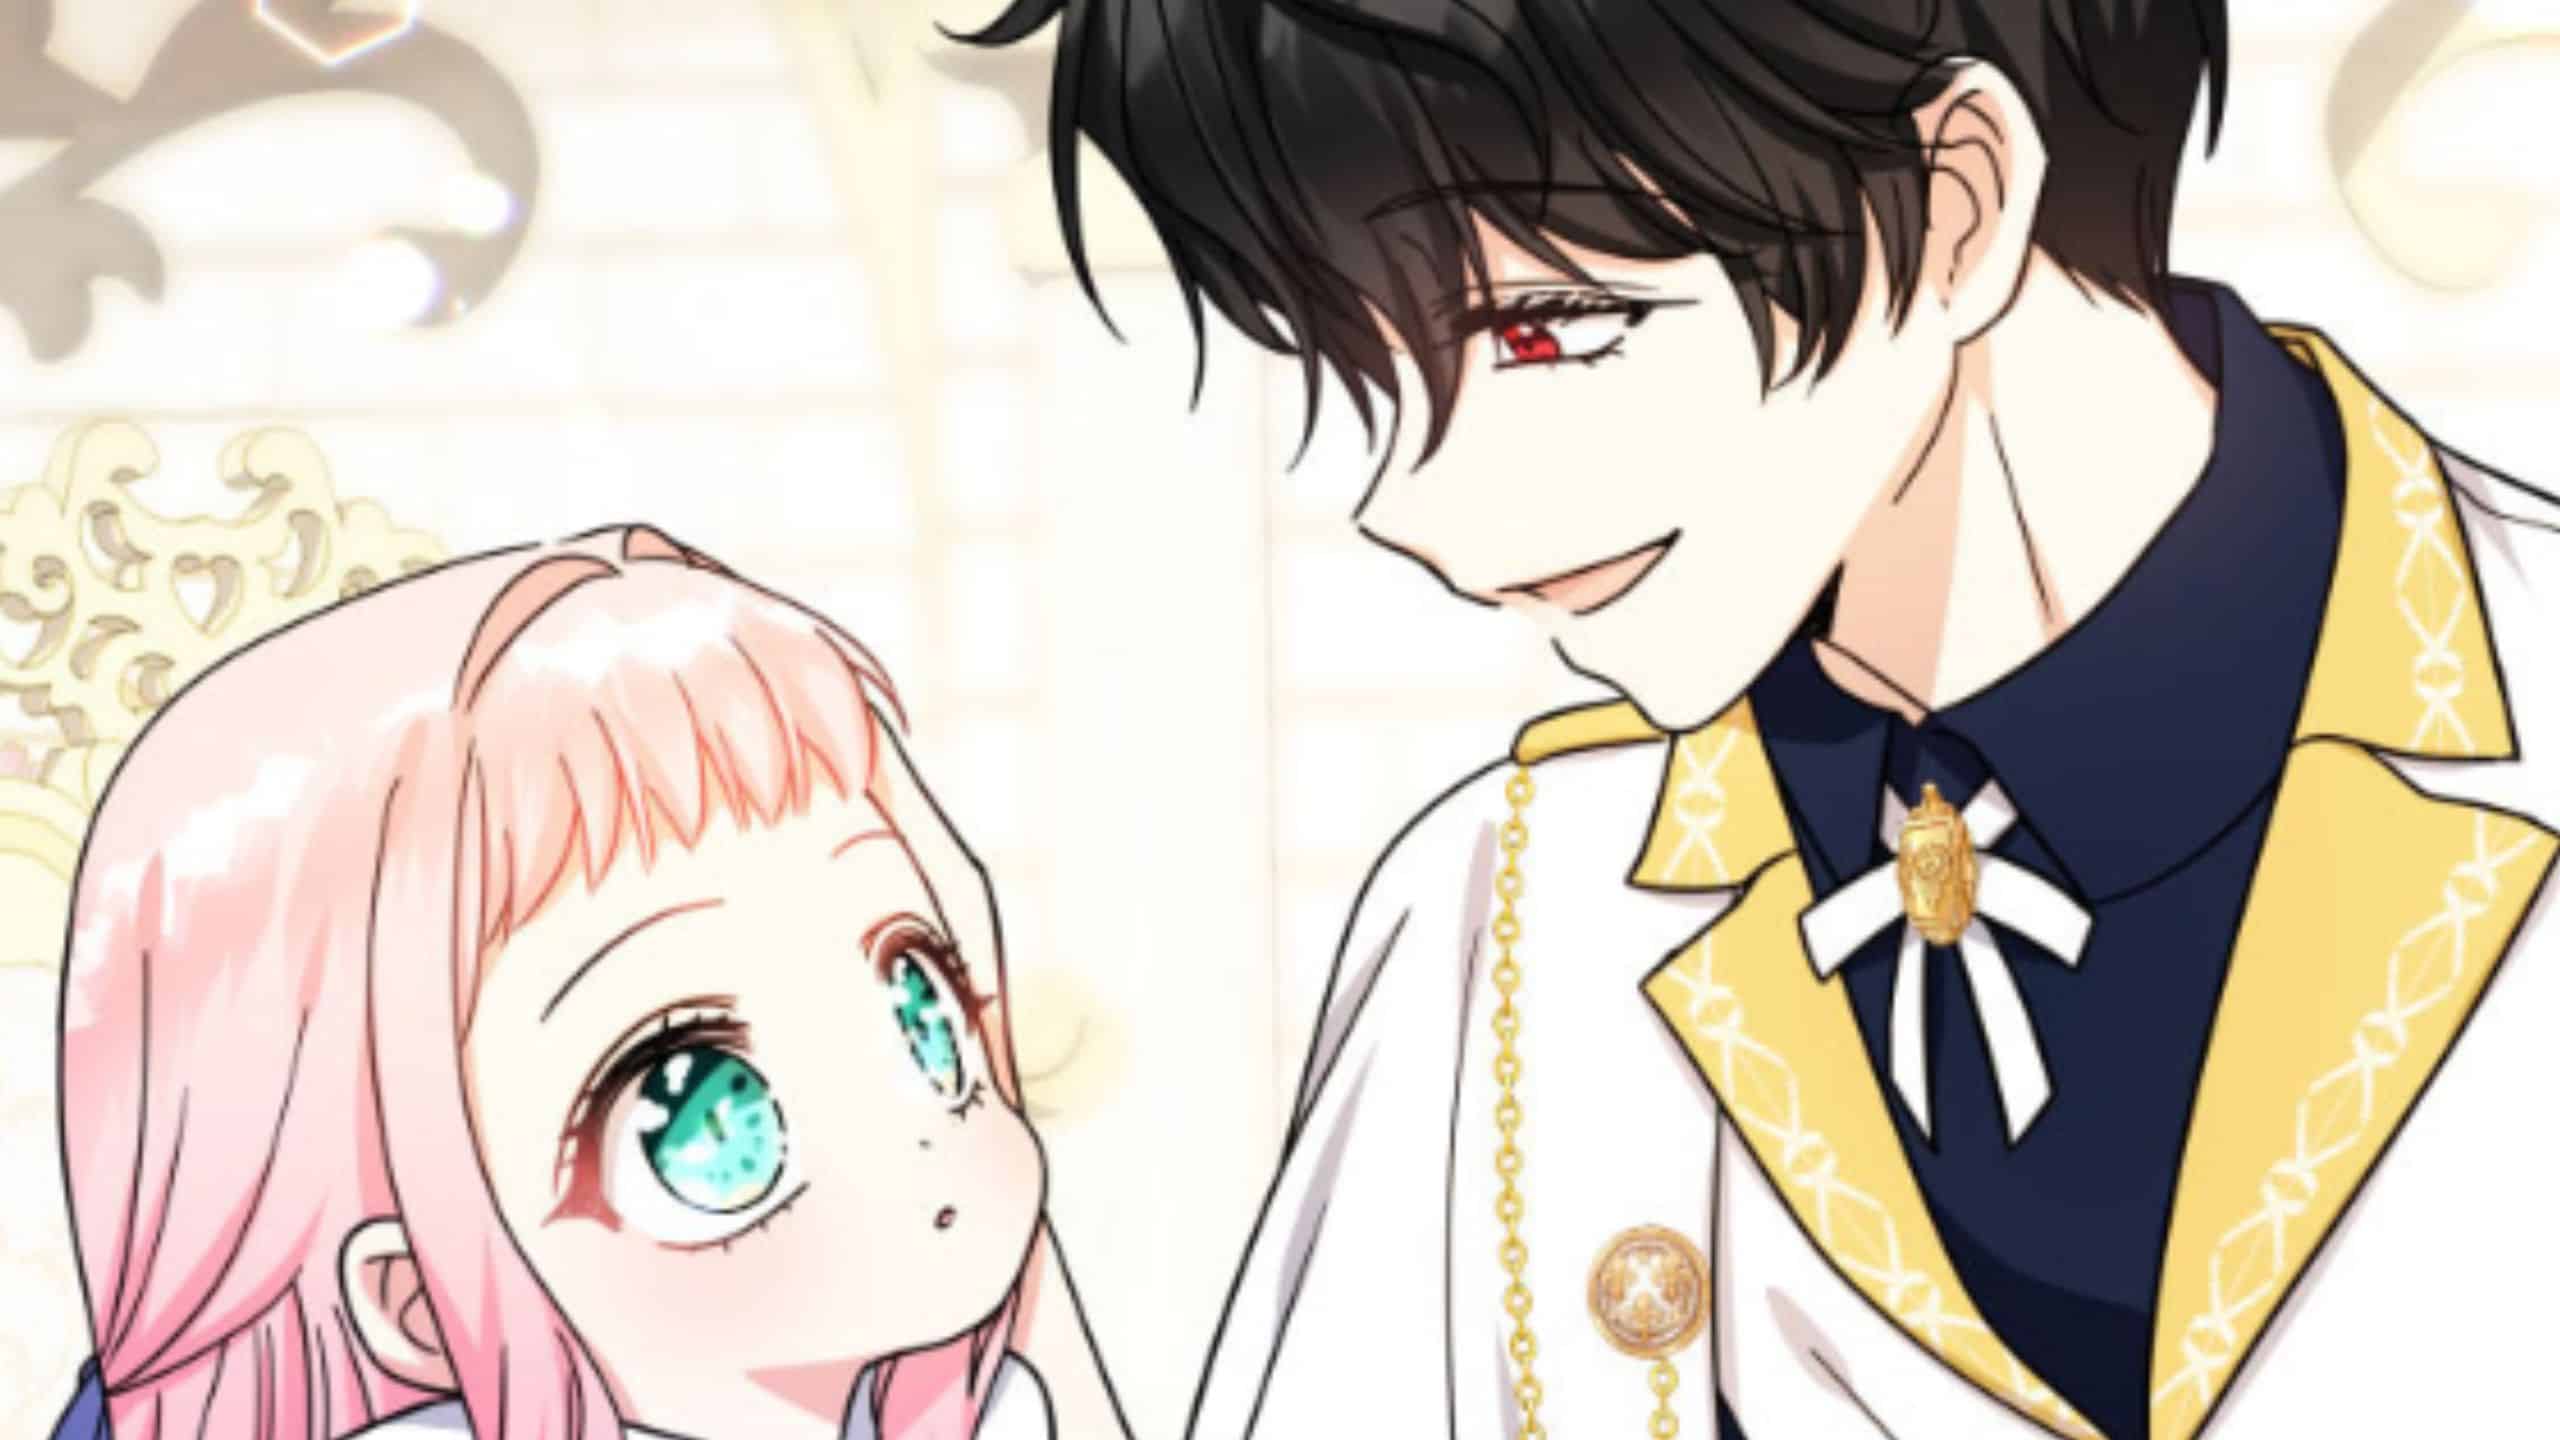 Lord Baby Runs A Romance Fantasy With Cash Chapter 29 Release Date